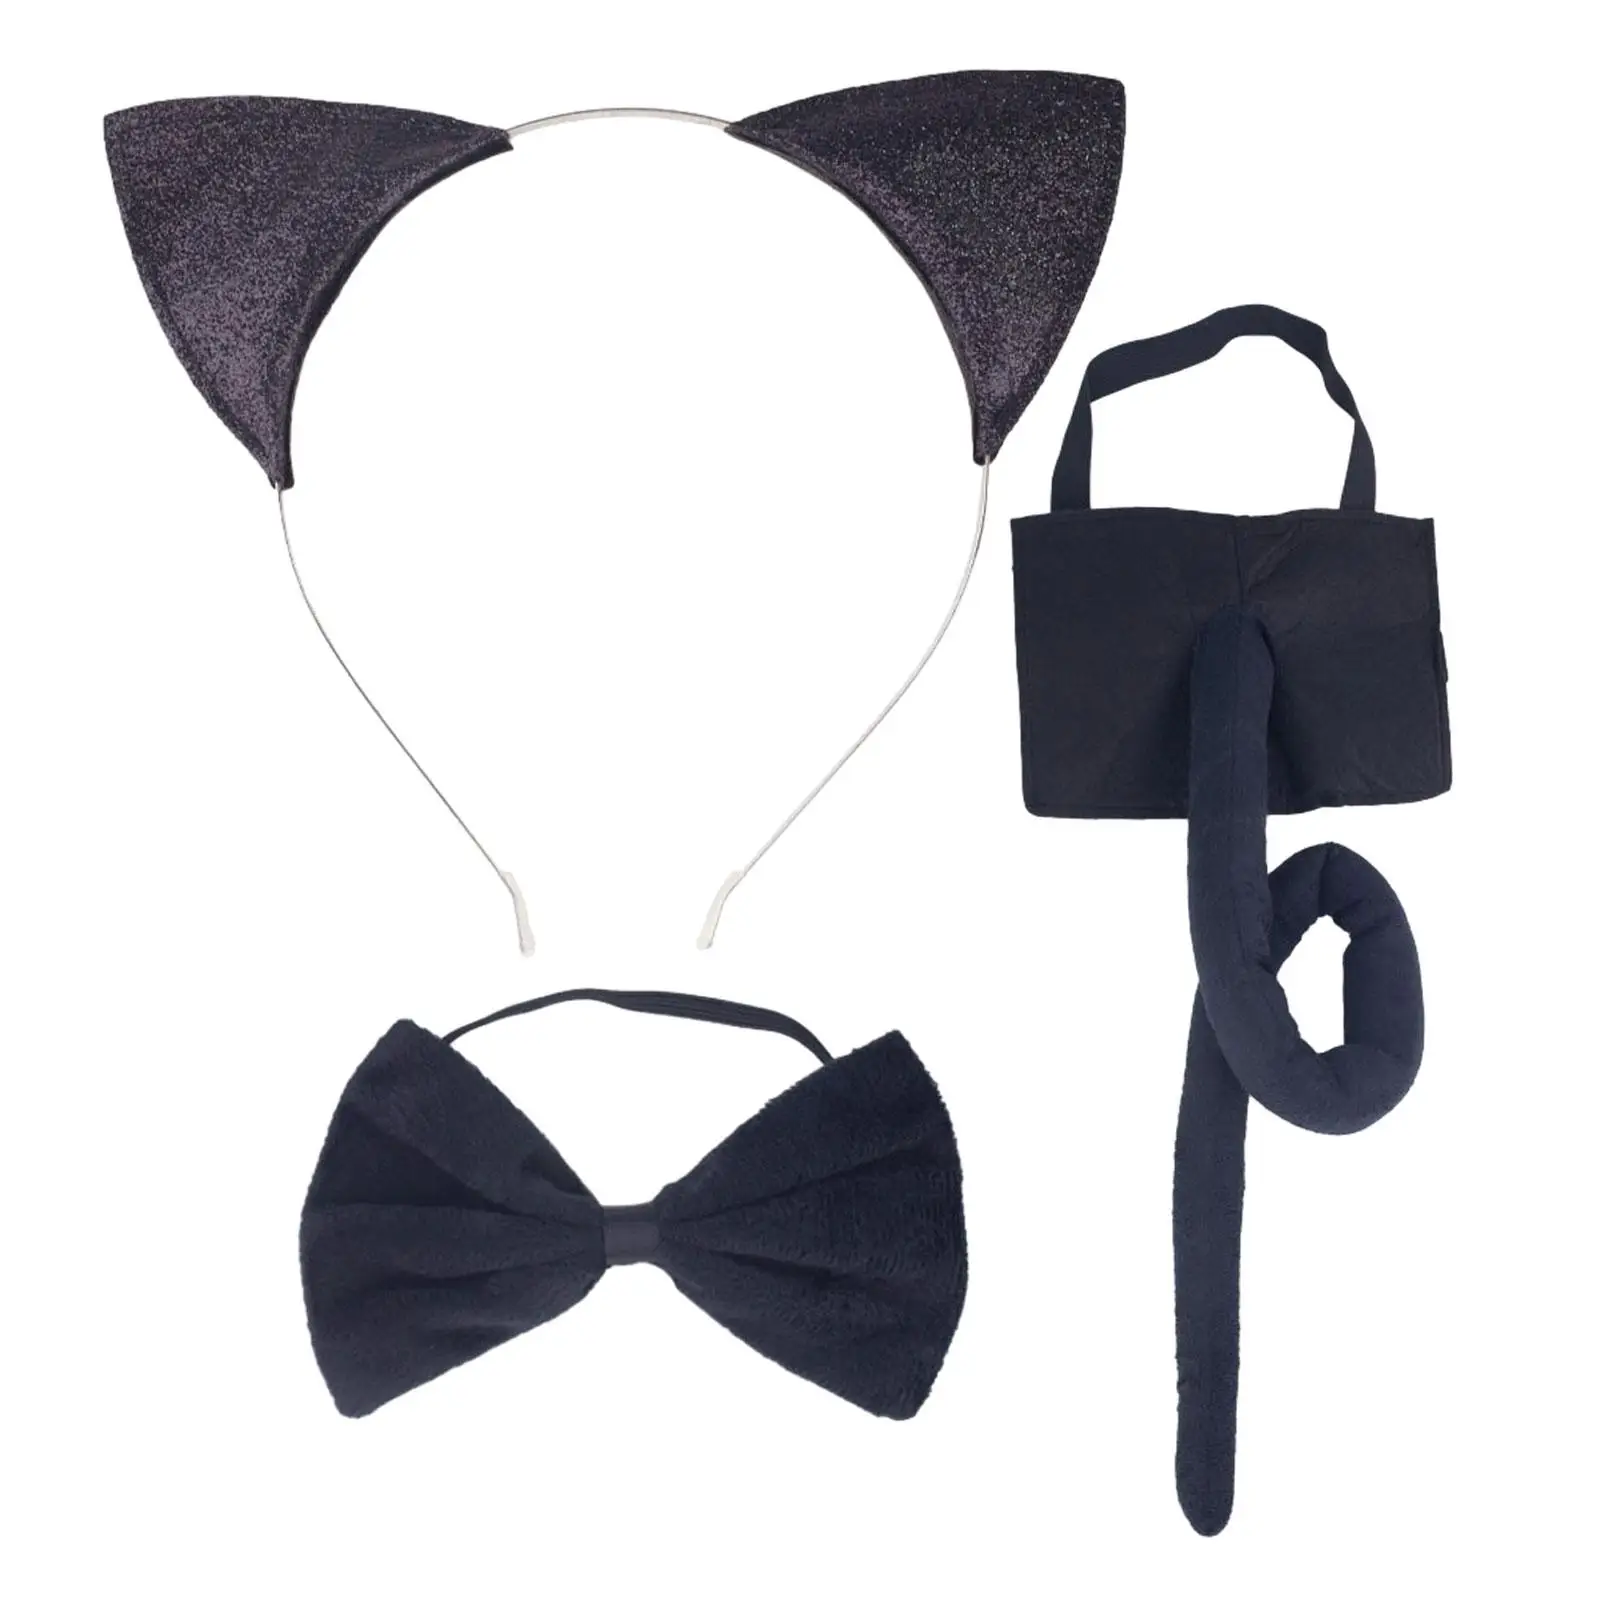 Kids Cat Ears, Bow Tie and Tail Set Hair Accessories Decorative Cosplay for Dressing up Halloween Party Child Boys and Girls